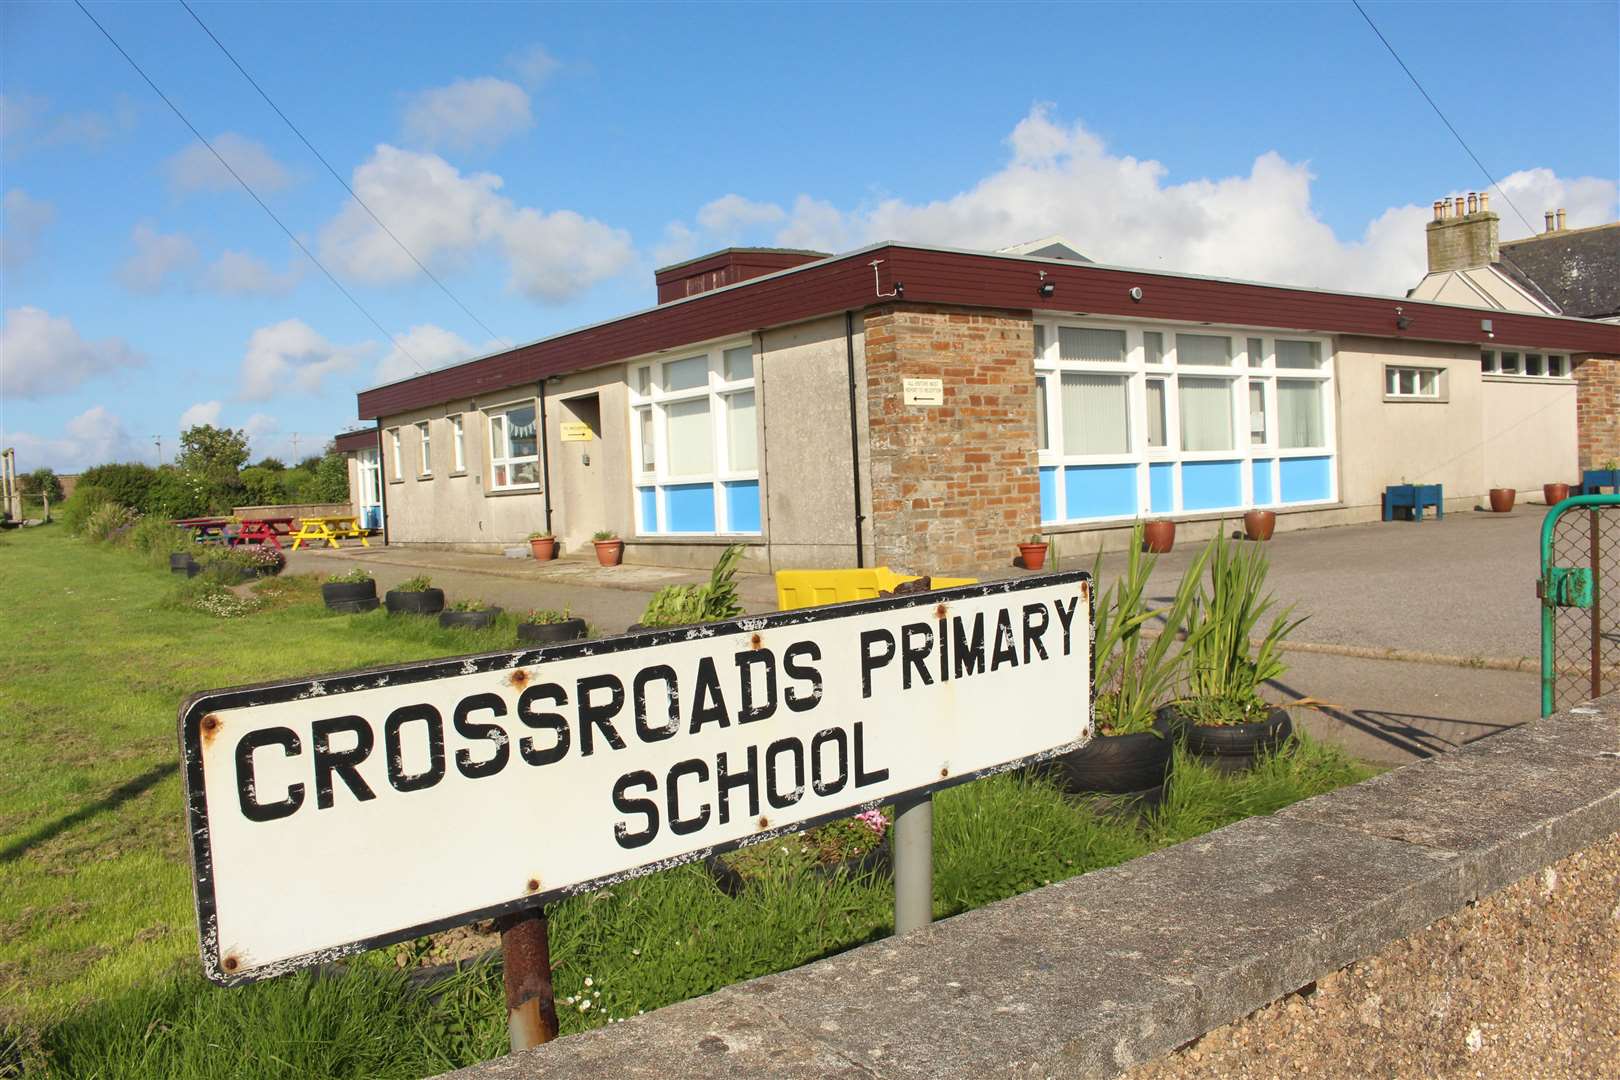 Crossroads is one of three primary schools in the Highlands to benefit from the anti-litter grant aid.